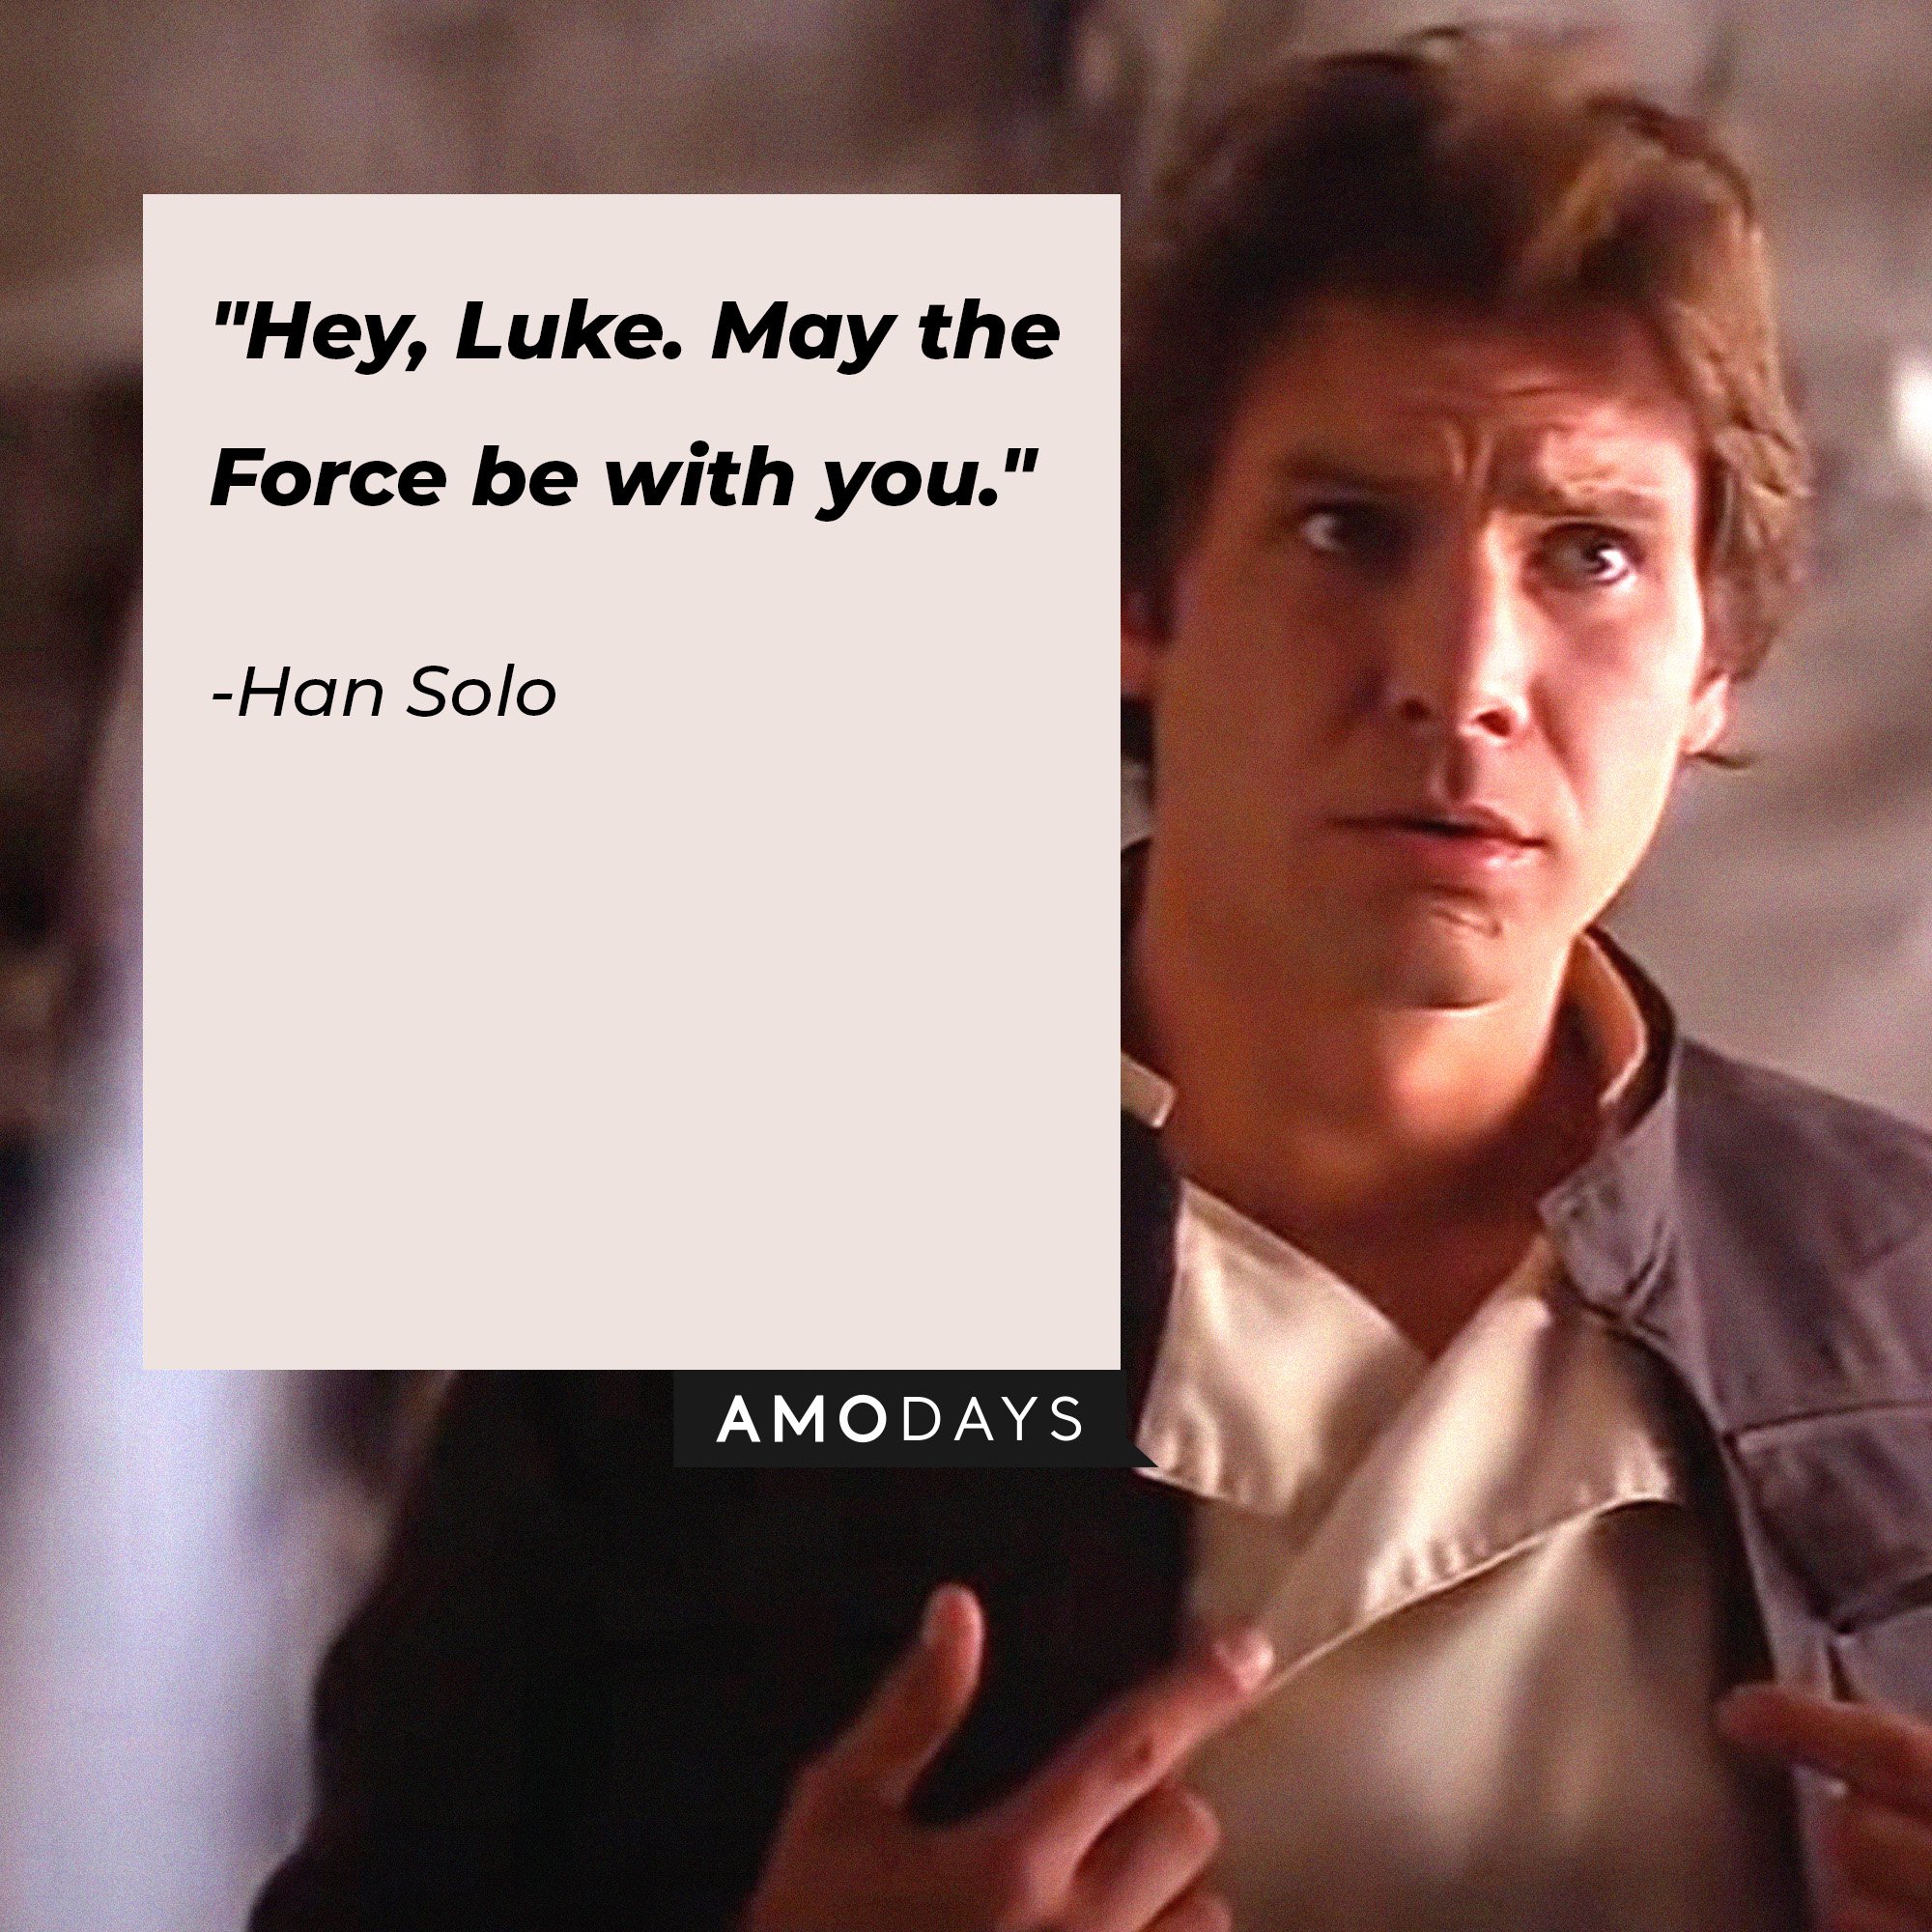 Han Solo’s quote: "Hey, Luke. May the Force be with you." | Image: AmoDays